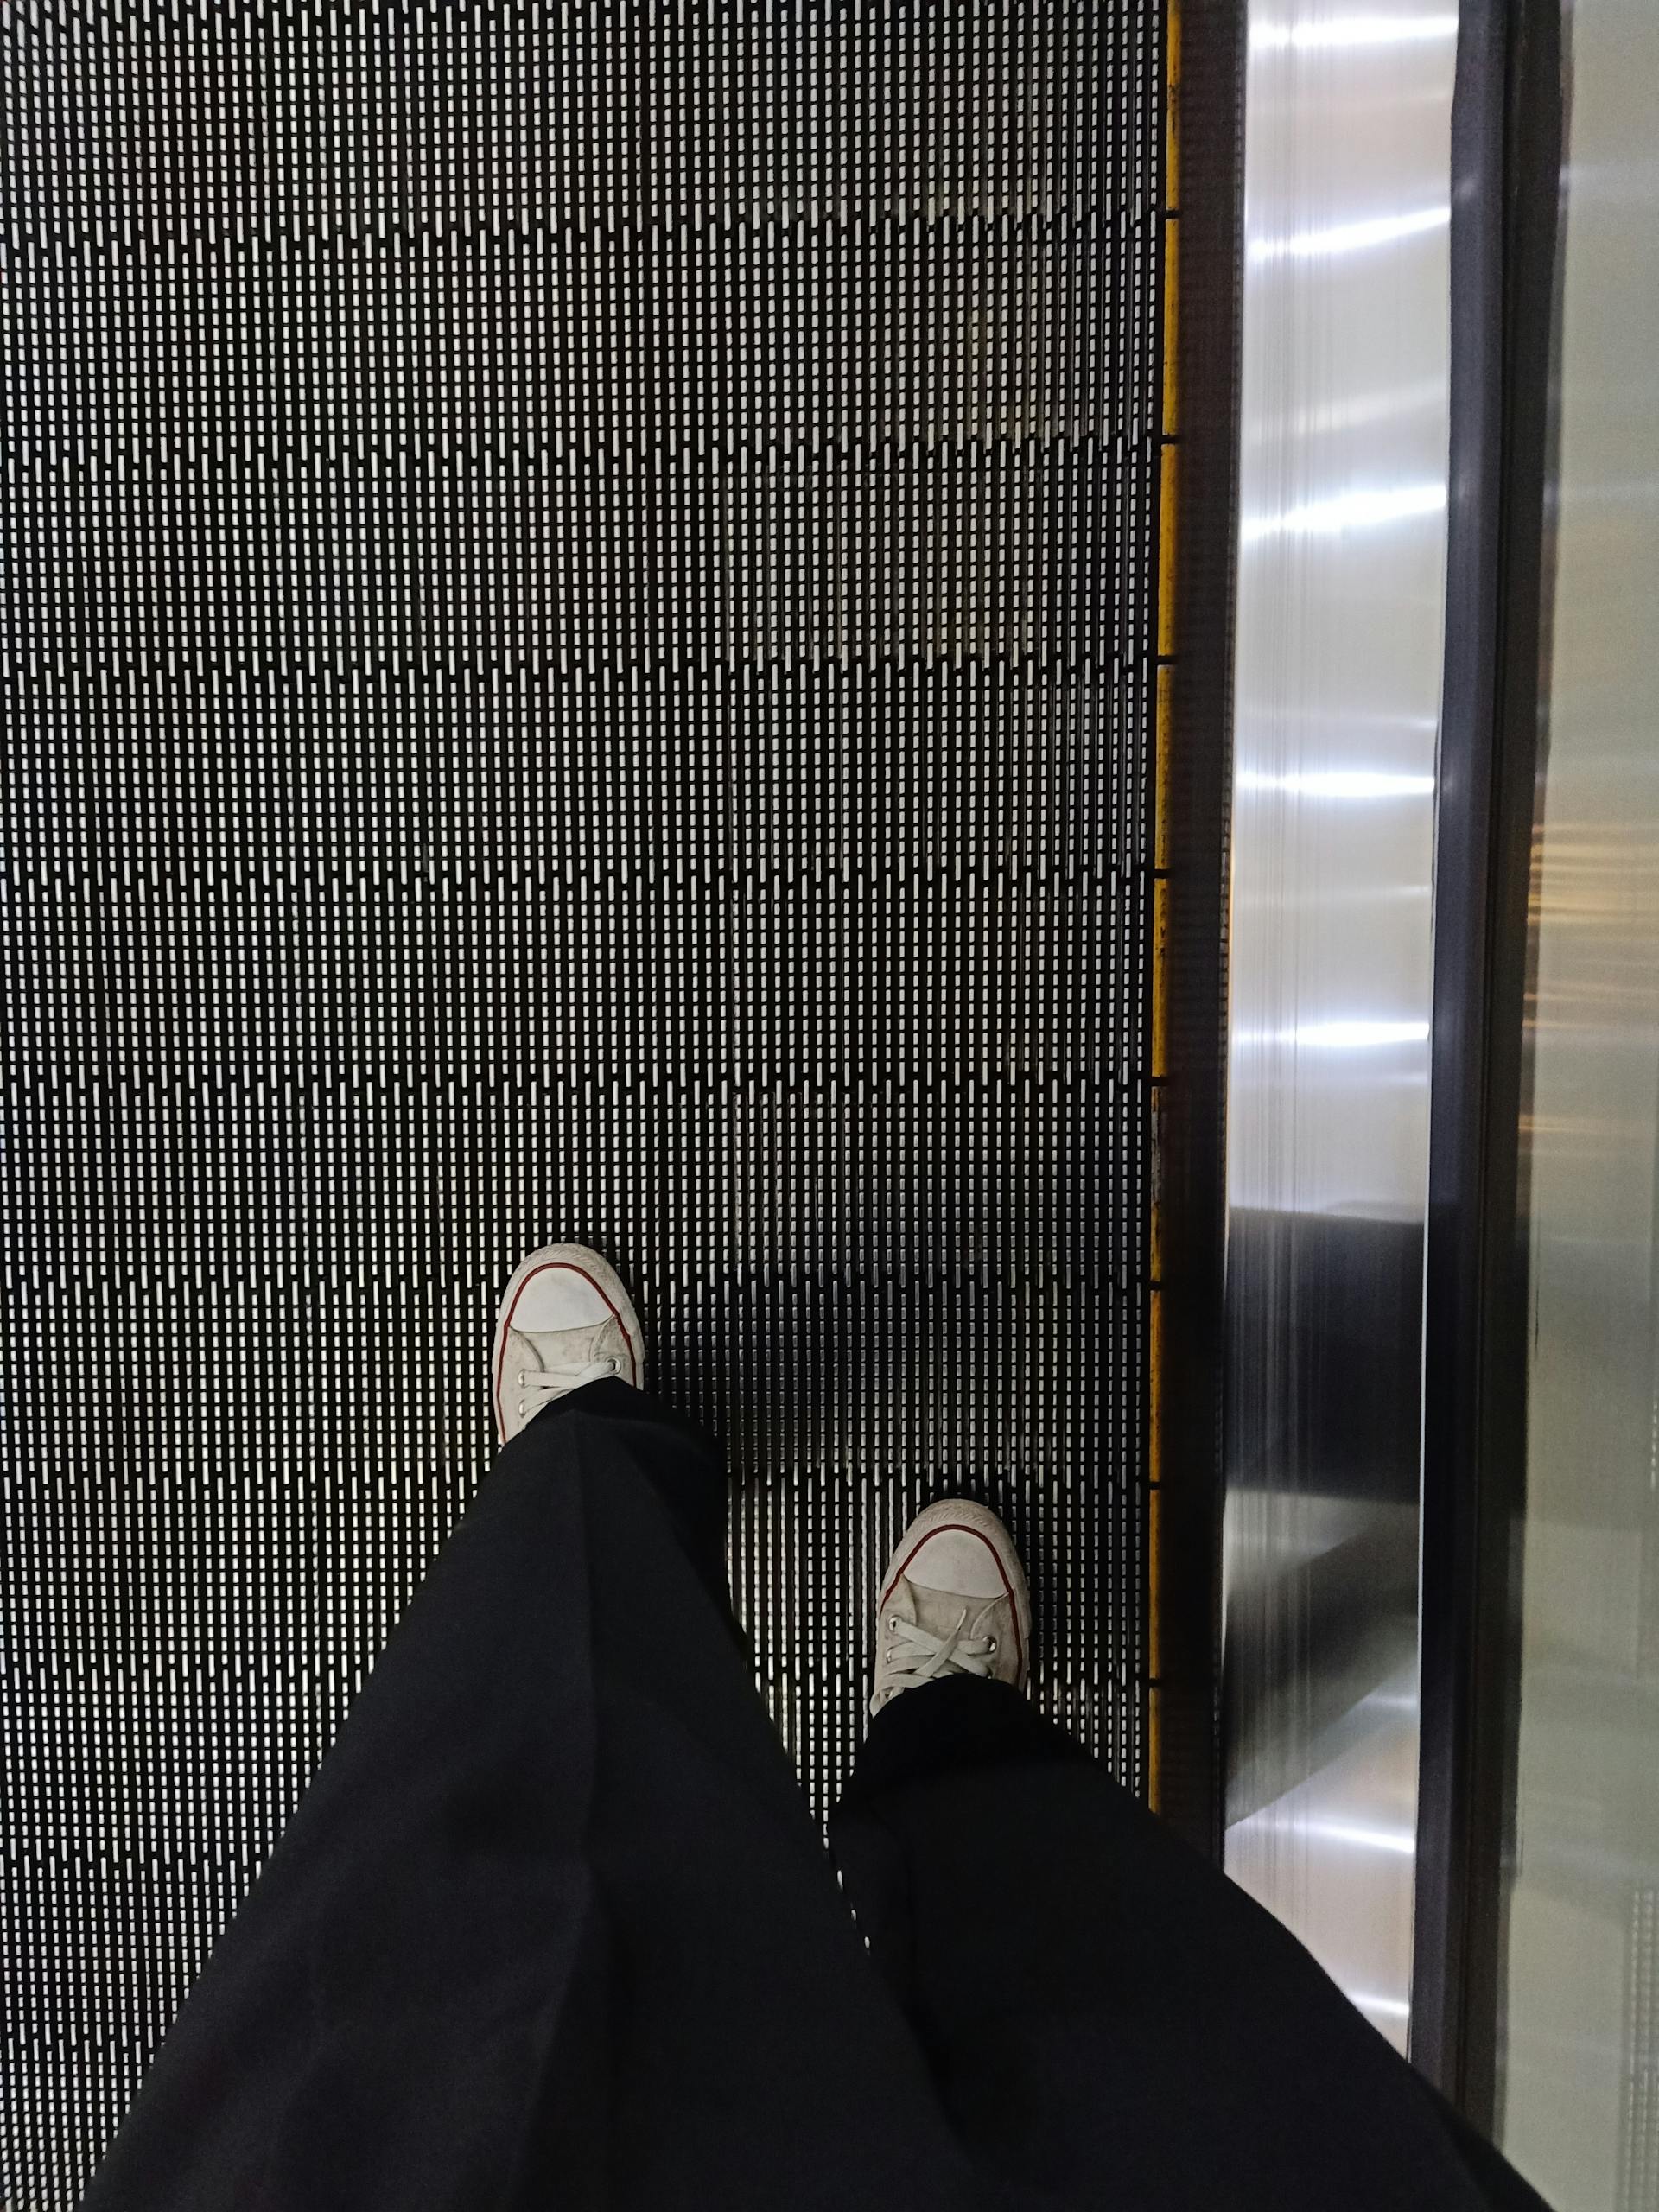 A person standing on a moving walkway | Source: Pexels